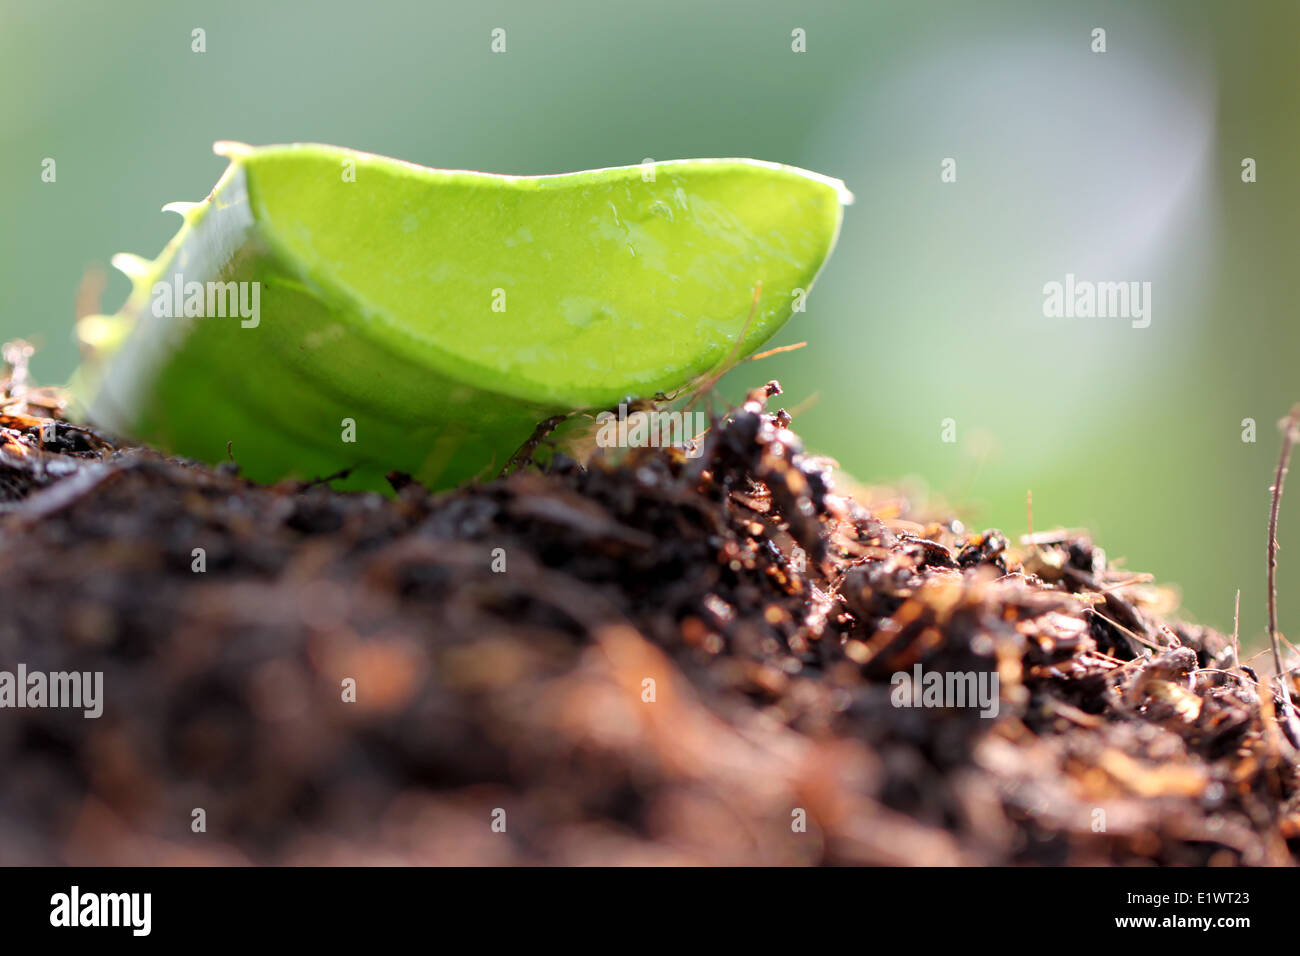 close up surface of aloe vera on ground in vegetable garden. Stock Photo